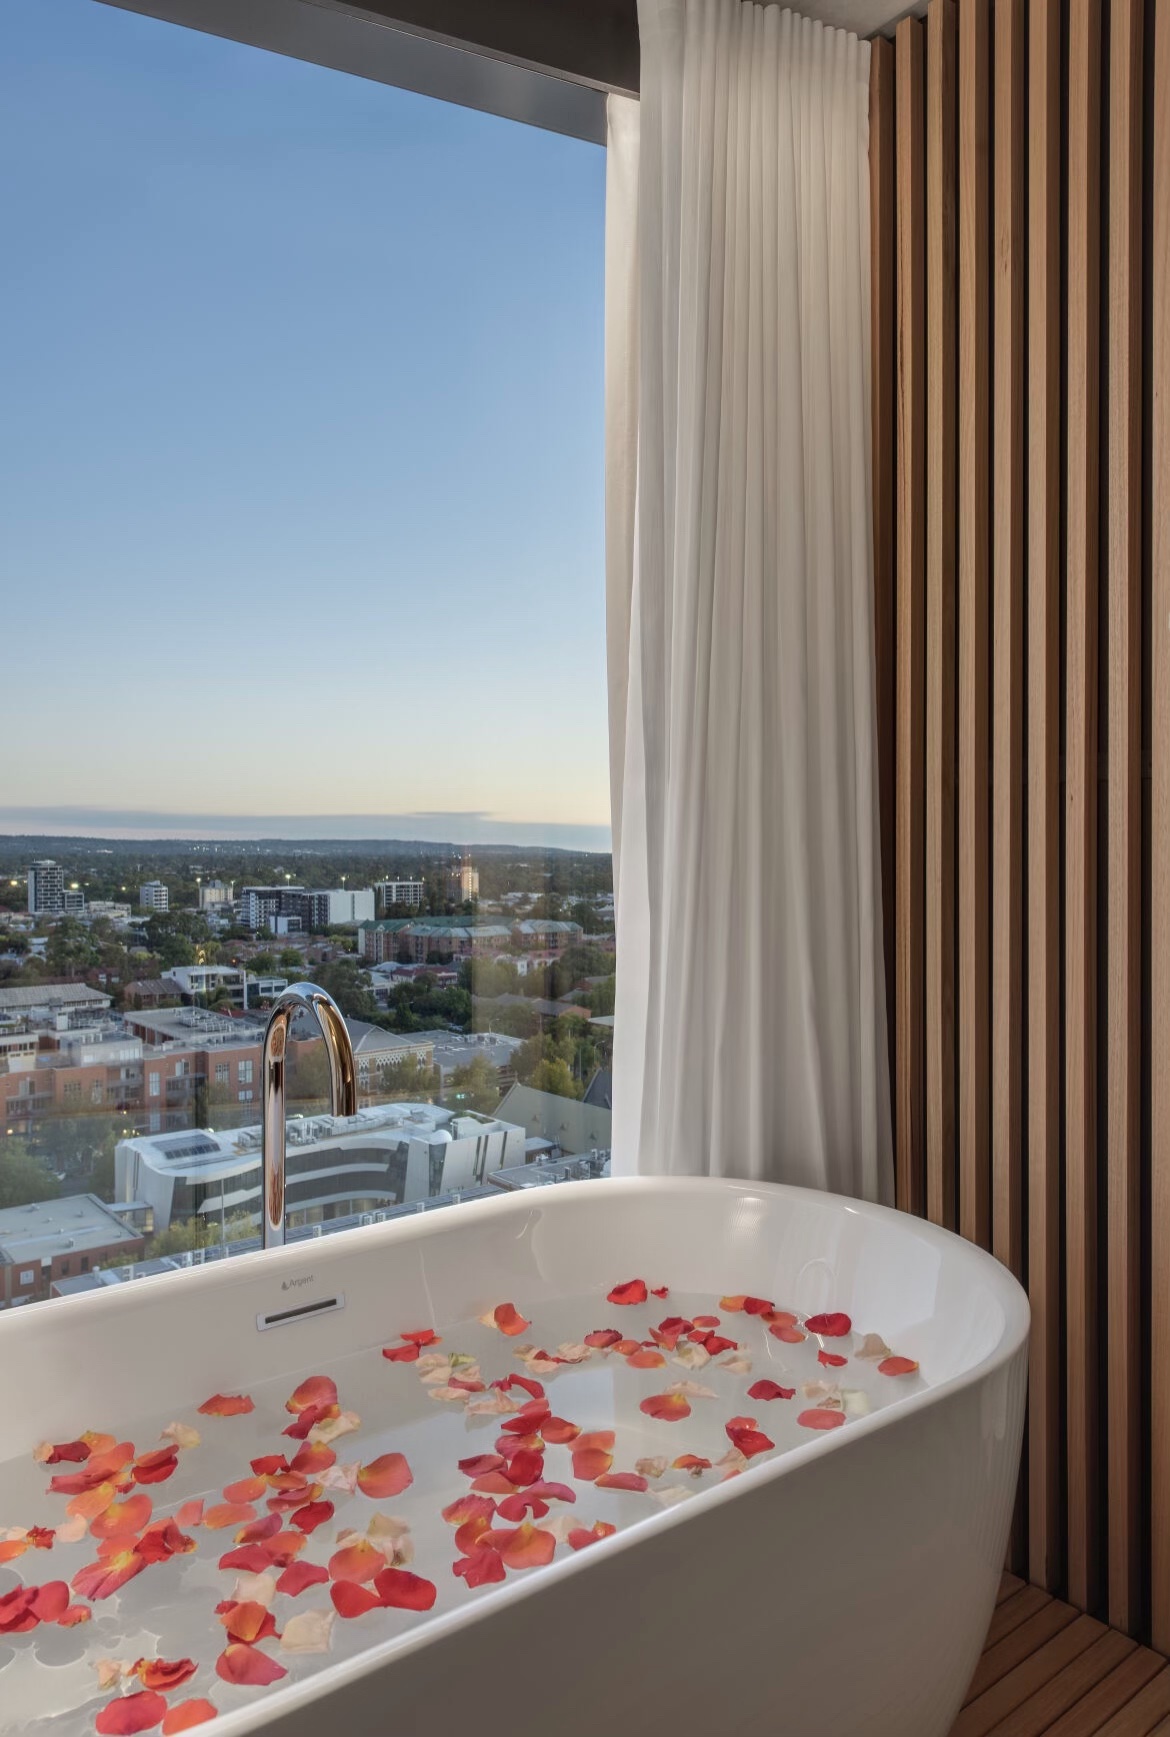 WIN a 2 Night Stay in the Vibe Hotel Urban Retreat Room Plus A Bottle of Bubbles and BreakFast For 2!